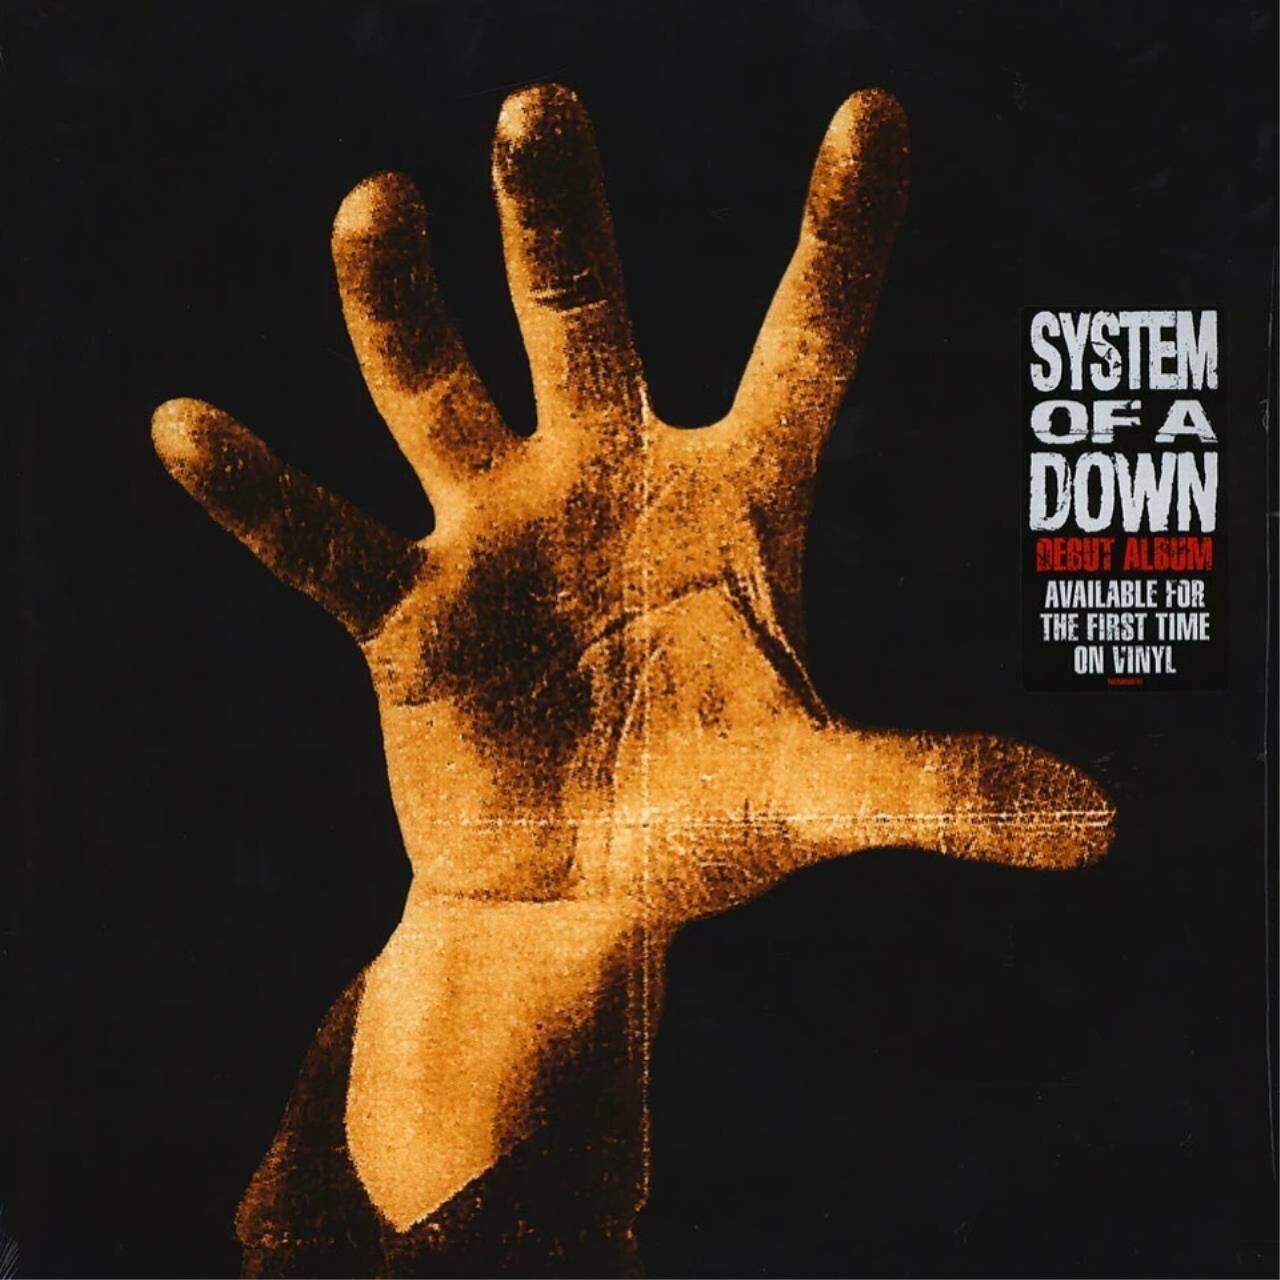 SYSTEM OF A DOWN SYSTEM OF A DOWN Limited Black Vinyl 12" винил